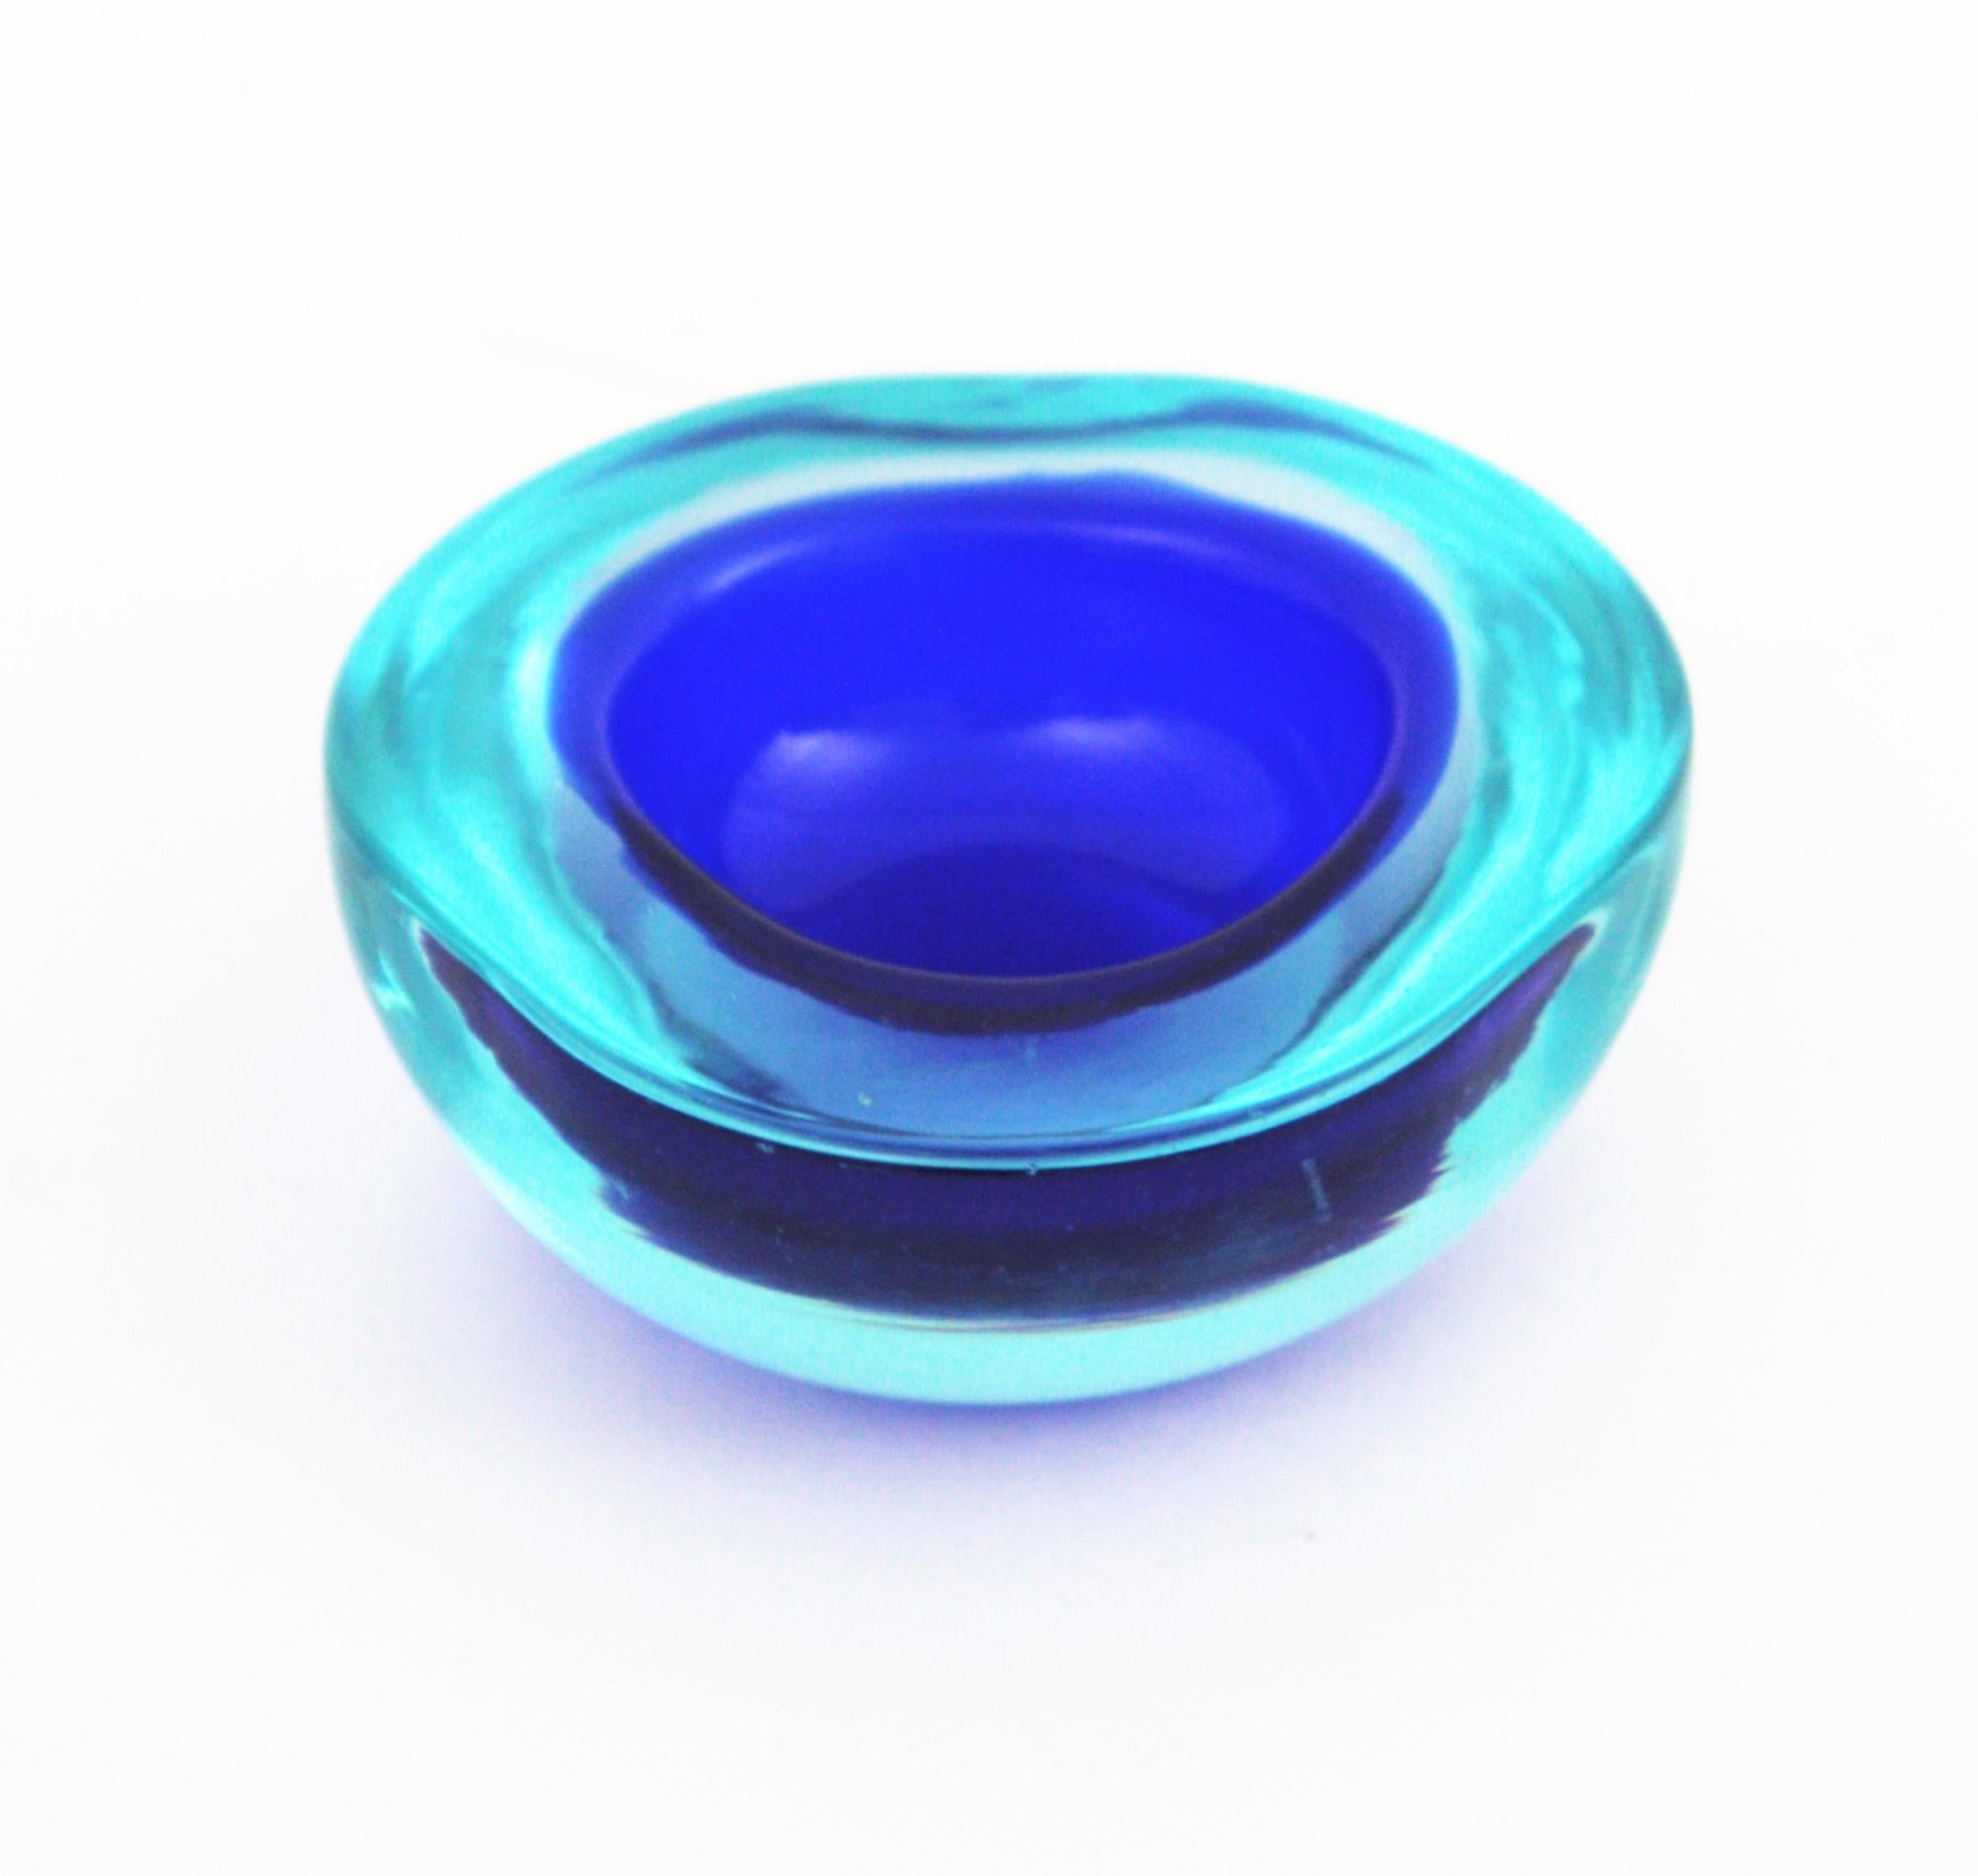 Mid-Century Modern Archimede Seguso Murano Small Sommerso Blue Glass Geode Bowl, 1960s For Sale